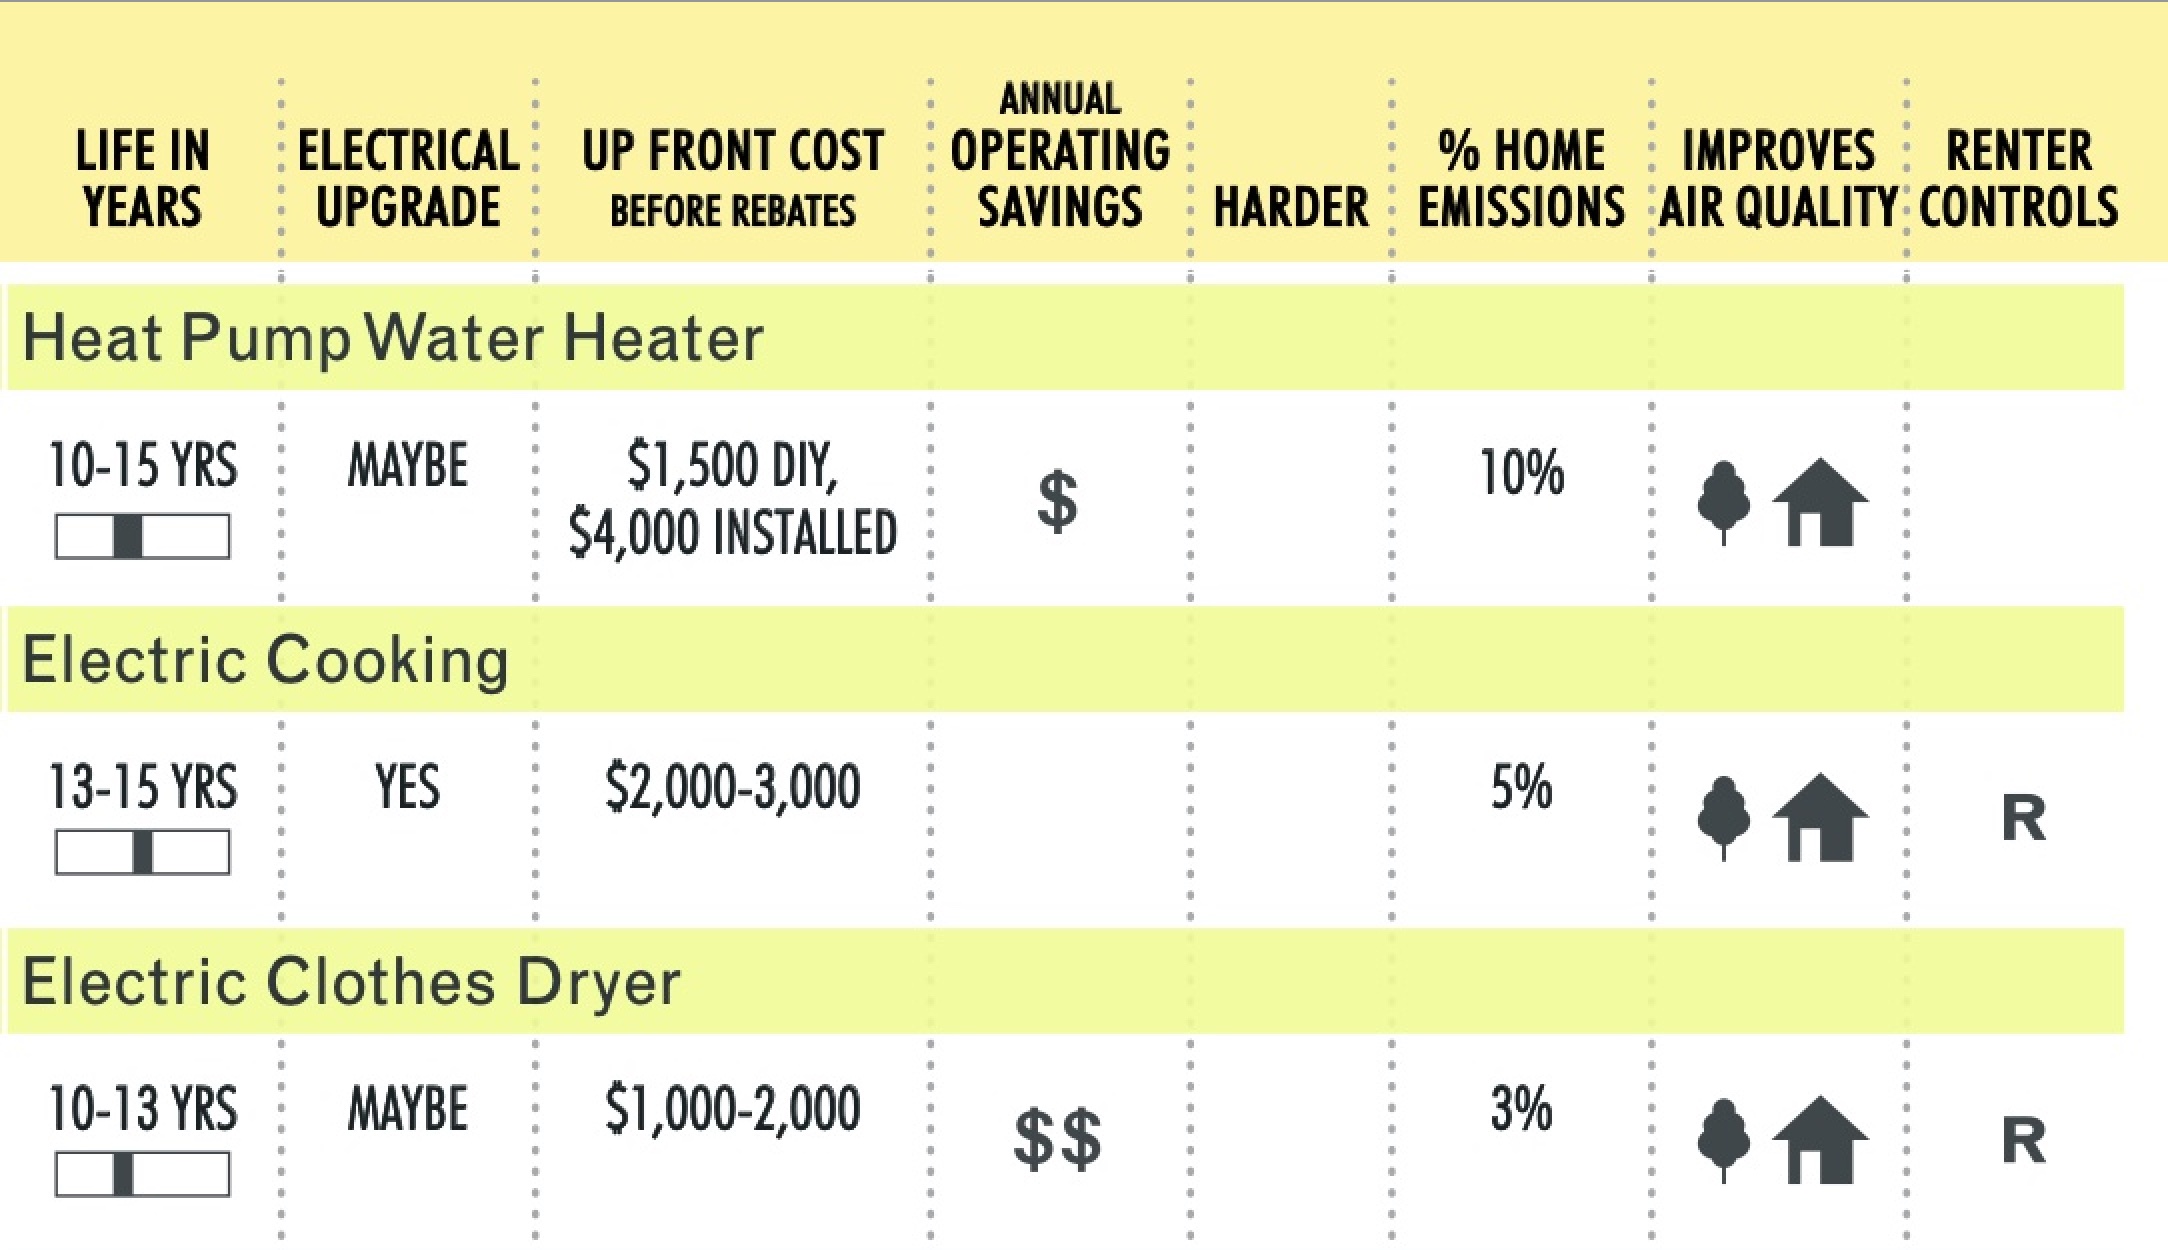 Table of appliance electrification impacts from Rewiring America’s Electrify Everything home guide